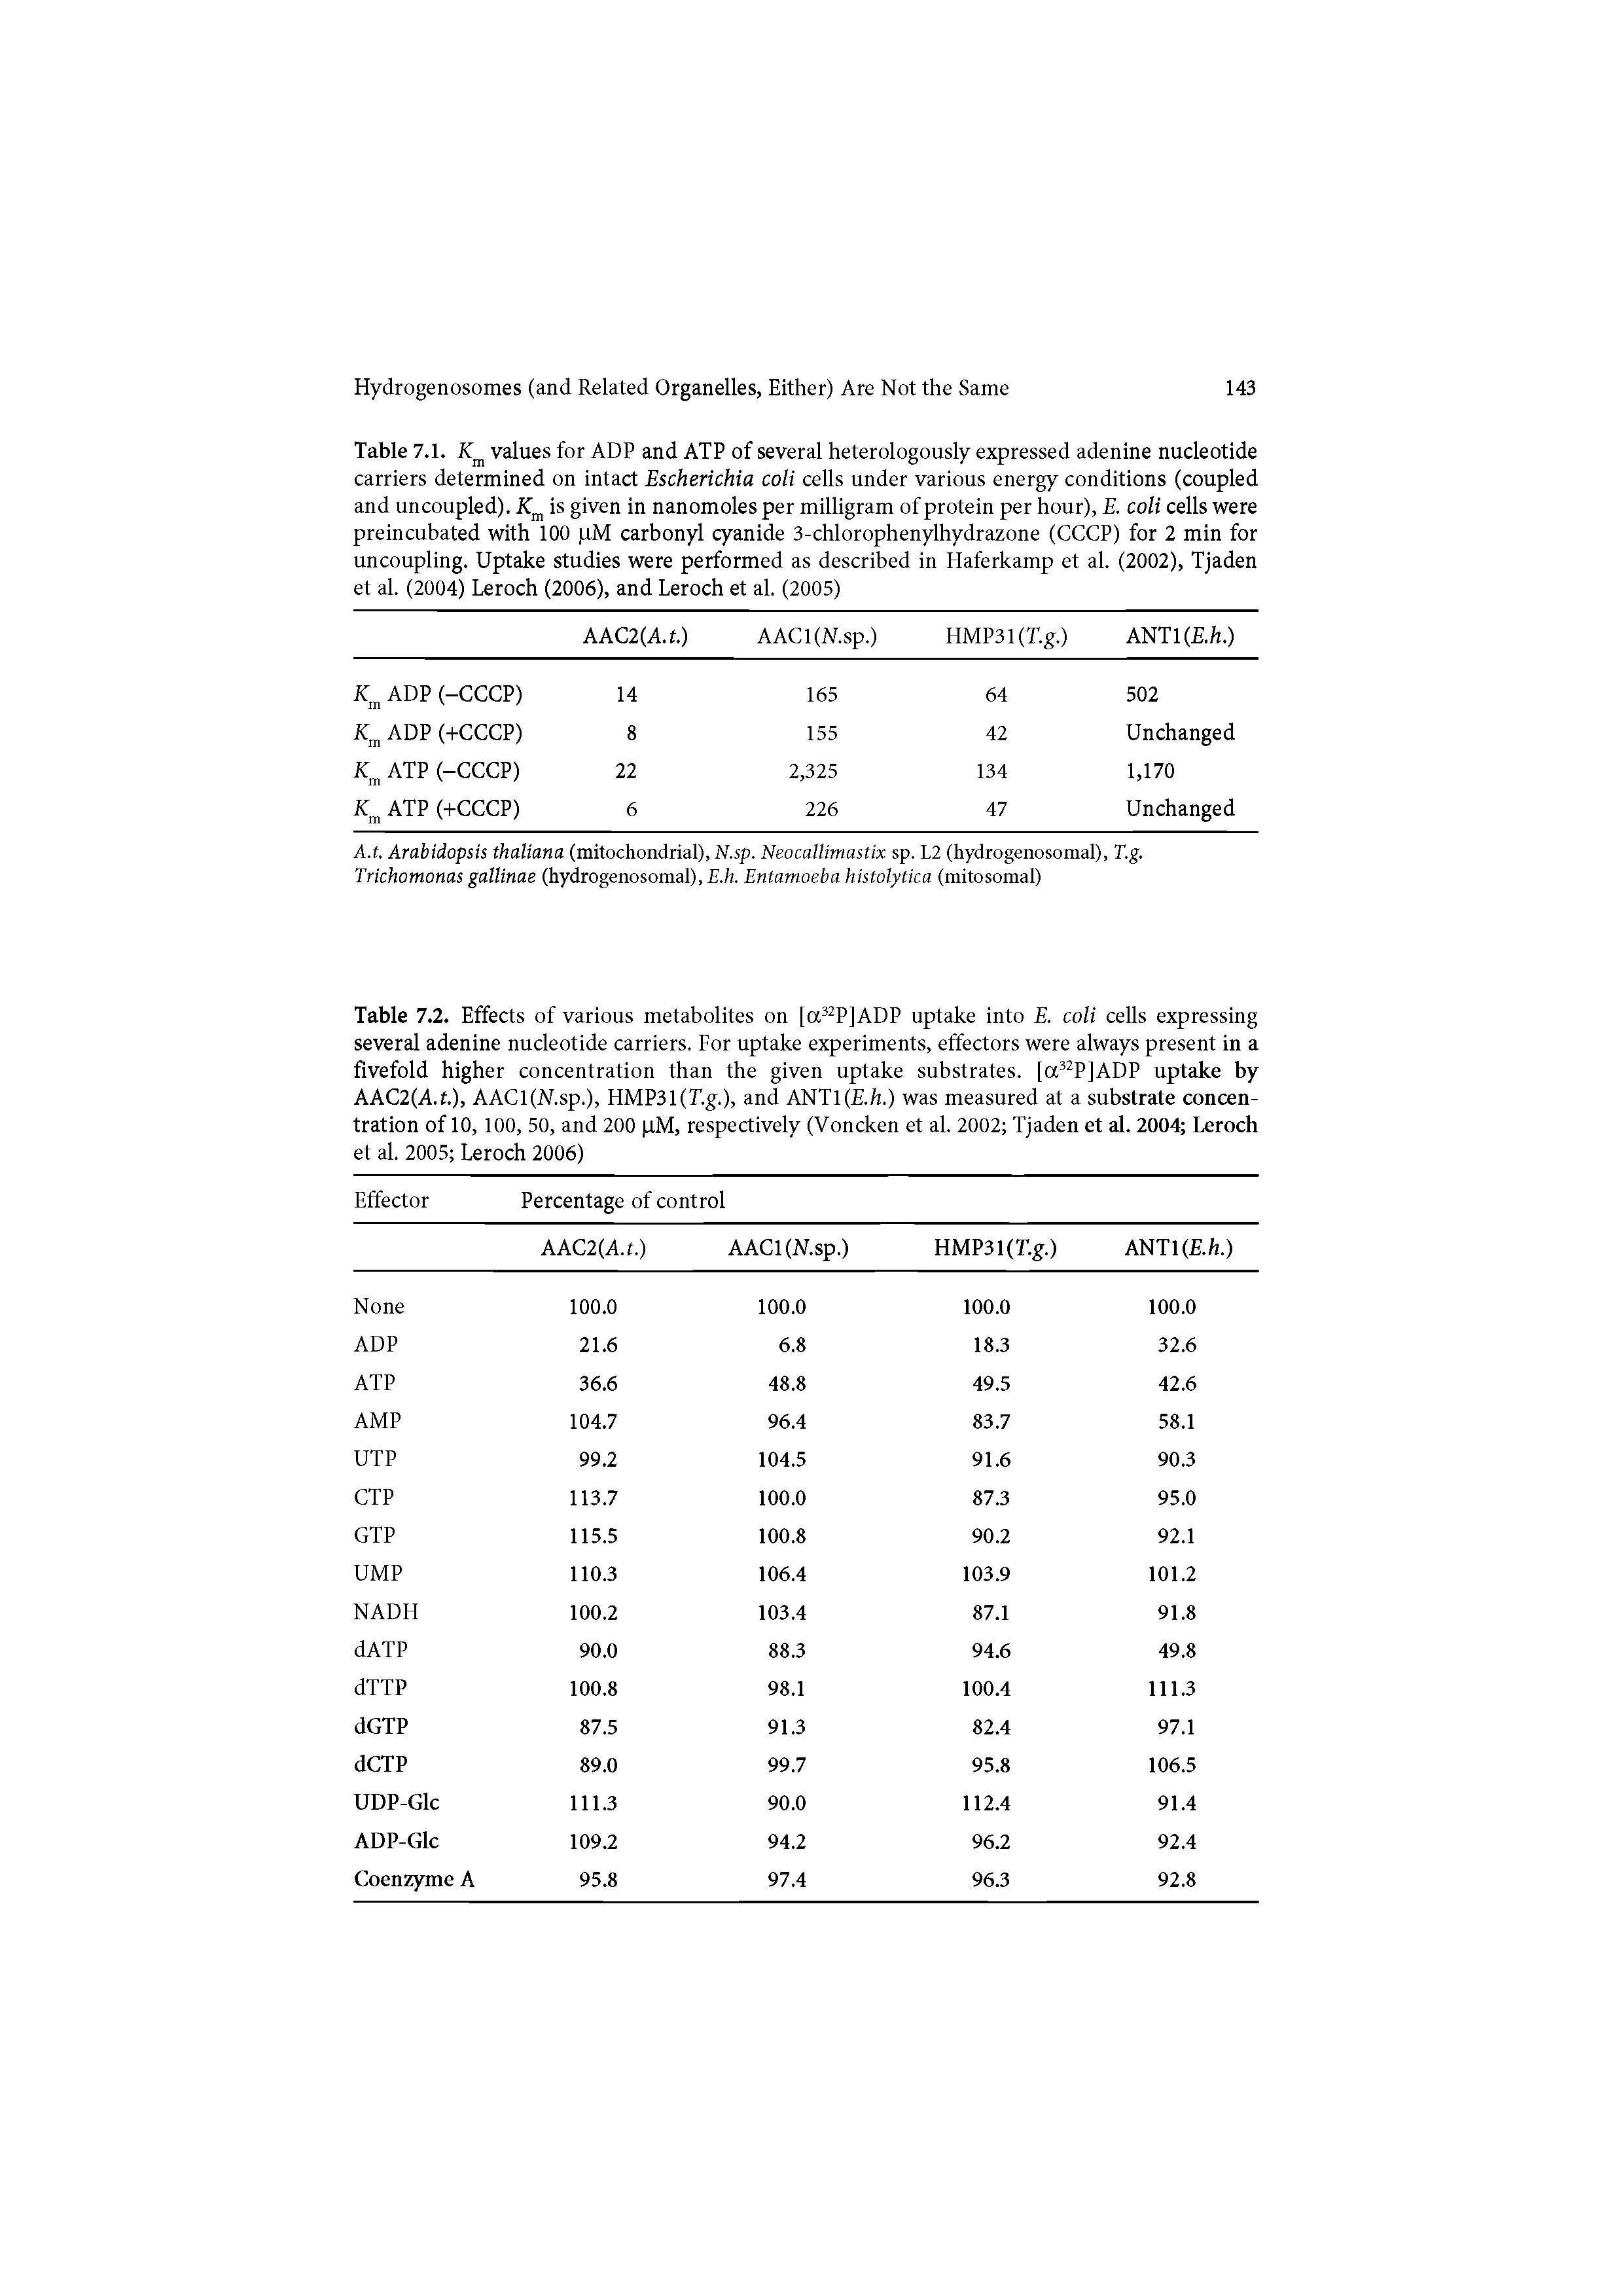 Table 7.1. Km values for ADP and ATP of several heterologously expressed adenine nucleotide carriers determined on intact Escherichia coli cells under various energy conditions (coupled and uncoupled). Km is given in nanomoles per milligram of protein per hour), E. coli cells were preincubated with 100 pM carbonyl cyanide 3-chlorophenylhydrazone (CCCP) for 2 min for uncoupling. Uptake studies were performed as described in Haferkamp et al. (2002), Tjaden et al. (2004) Leroch (2006), and Leroch et al. (2005)...